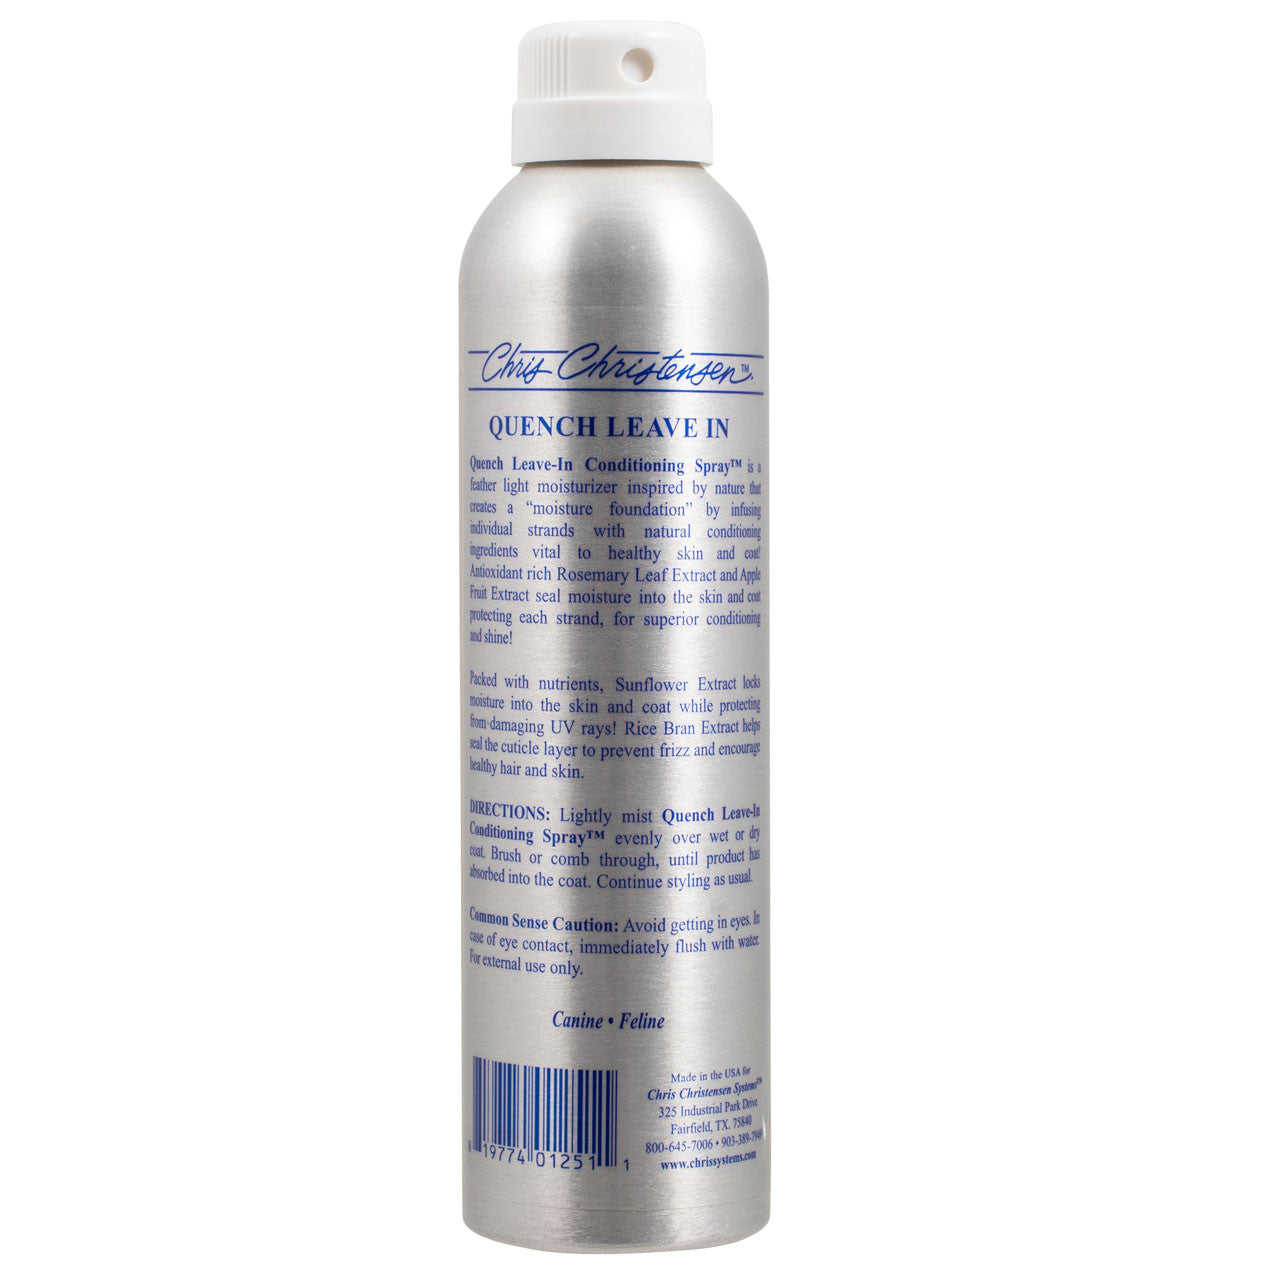 Chris Christensen Quench Leave in Conditioner Spray for Dogs, 8oz